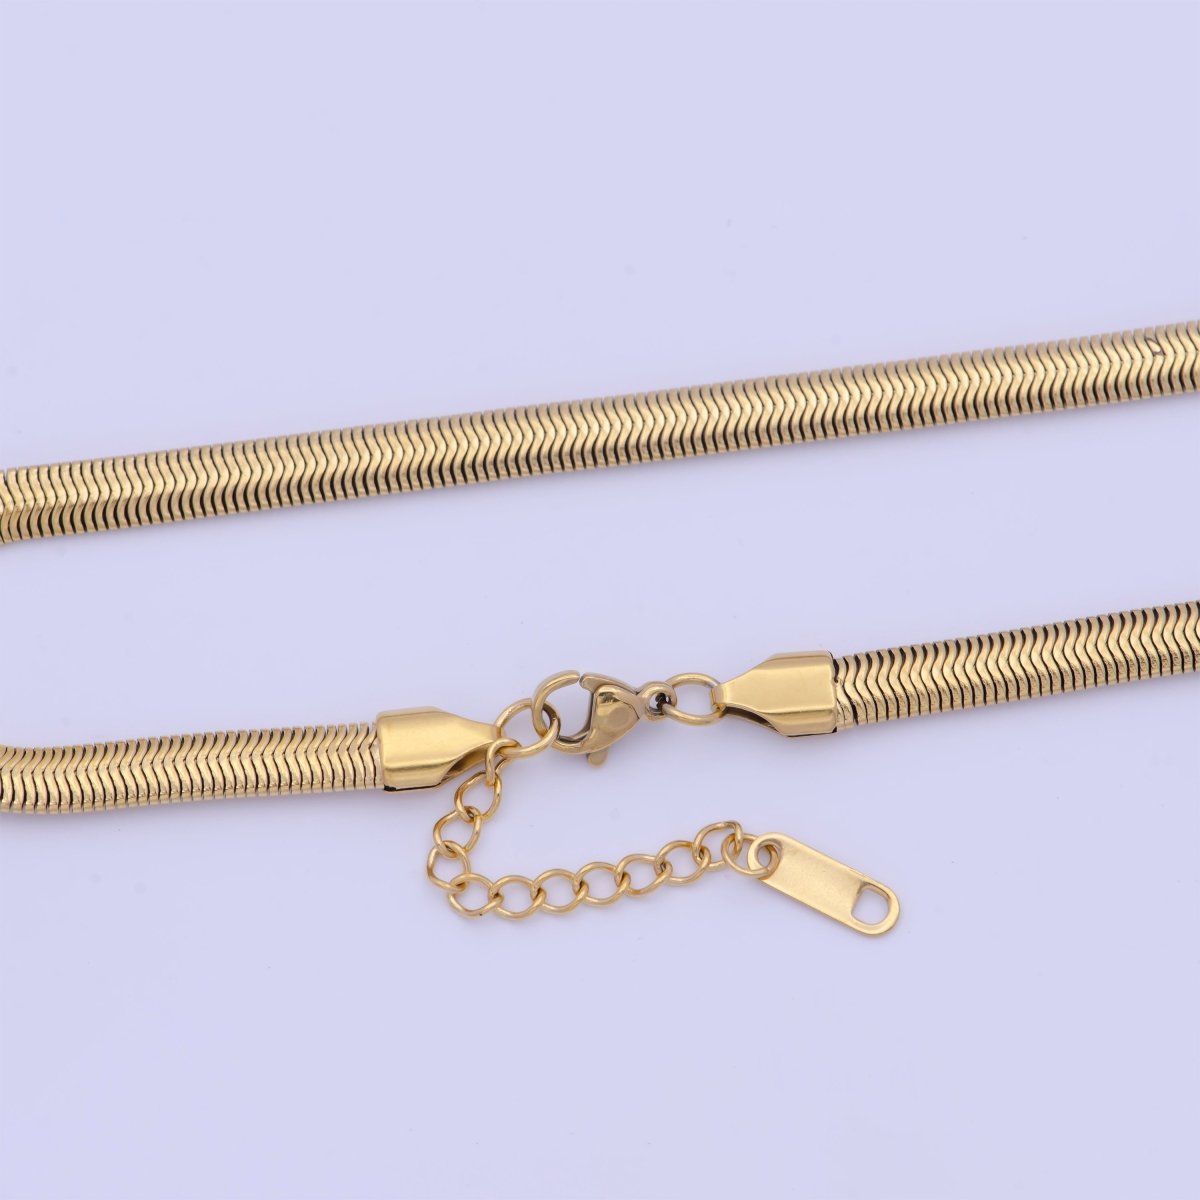 Snake Chain Necklace 16 18 20 Inch + 2.5" extender Length in 24k Gold Filled Chain | WA-1134 to WA-1139 Clearance Pricing - DLUXCA